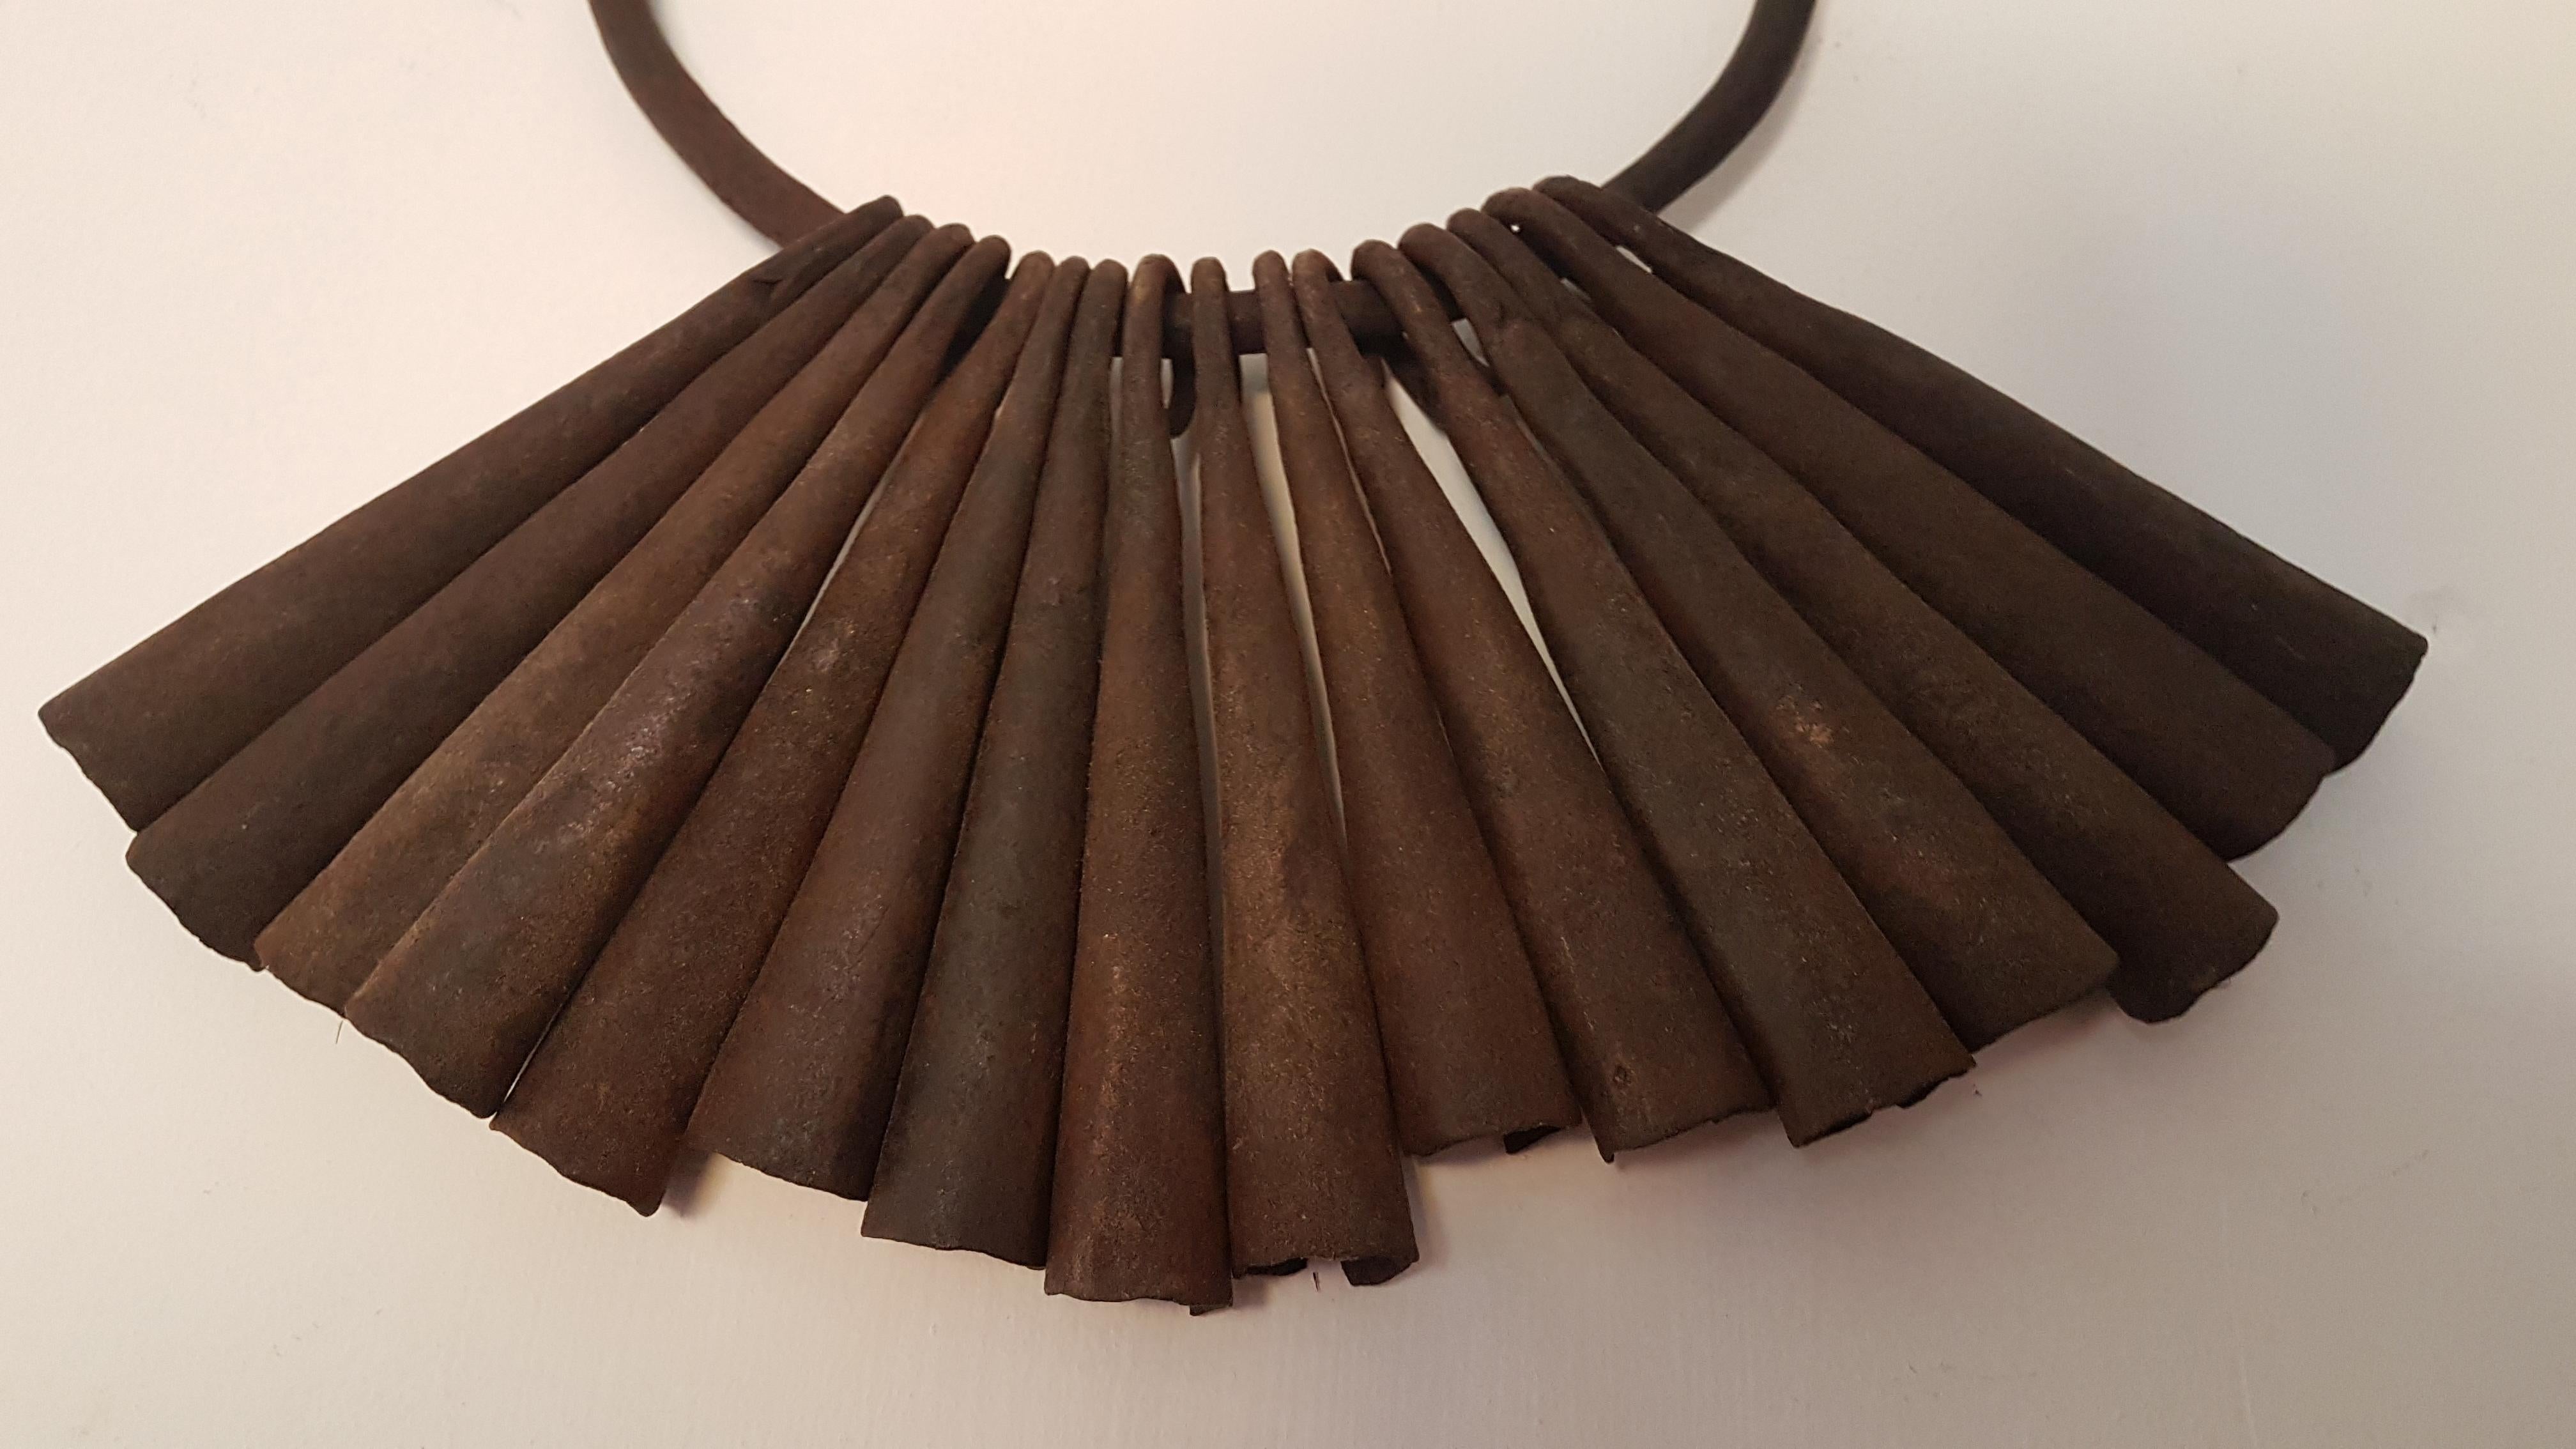 An excellent and unusual early 20th century tribal currency item that has 16 individual gongs on a large iron hoop. Displays well and can be hung anywhere, measures 30cm high from top to bottom, average gong height is 13cm with the hoop diameter